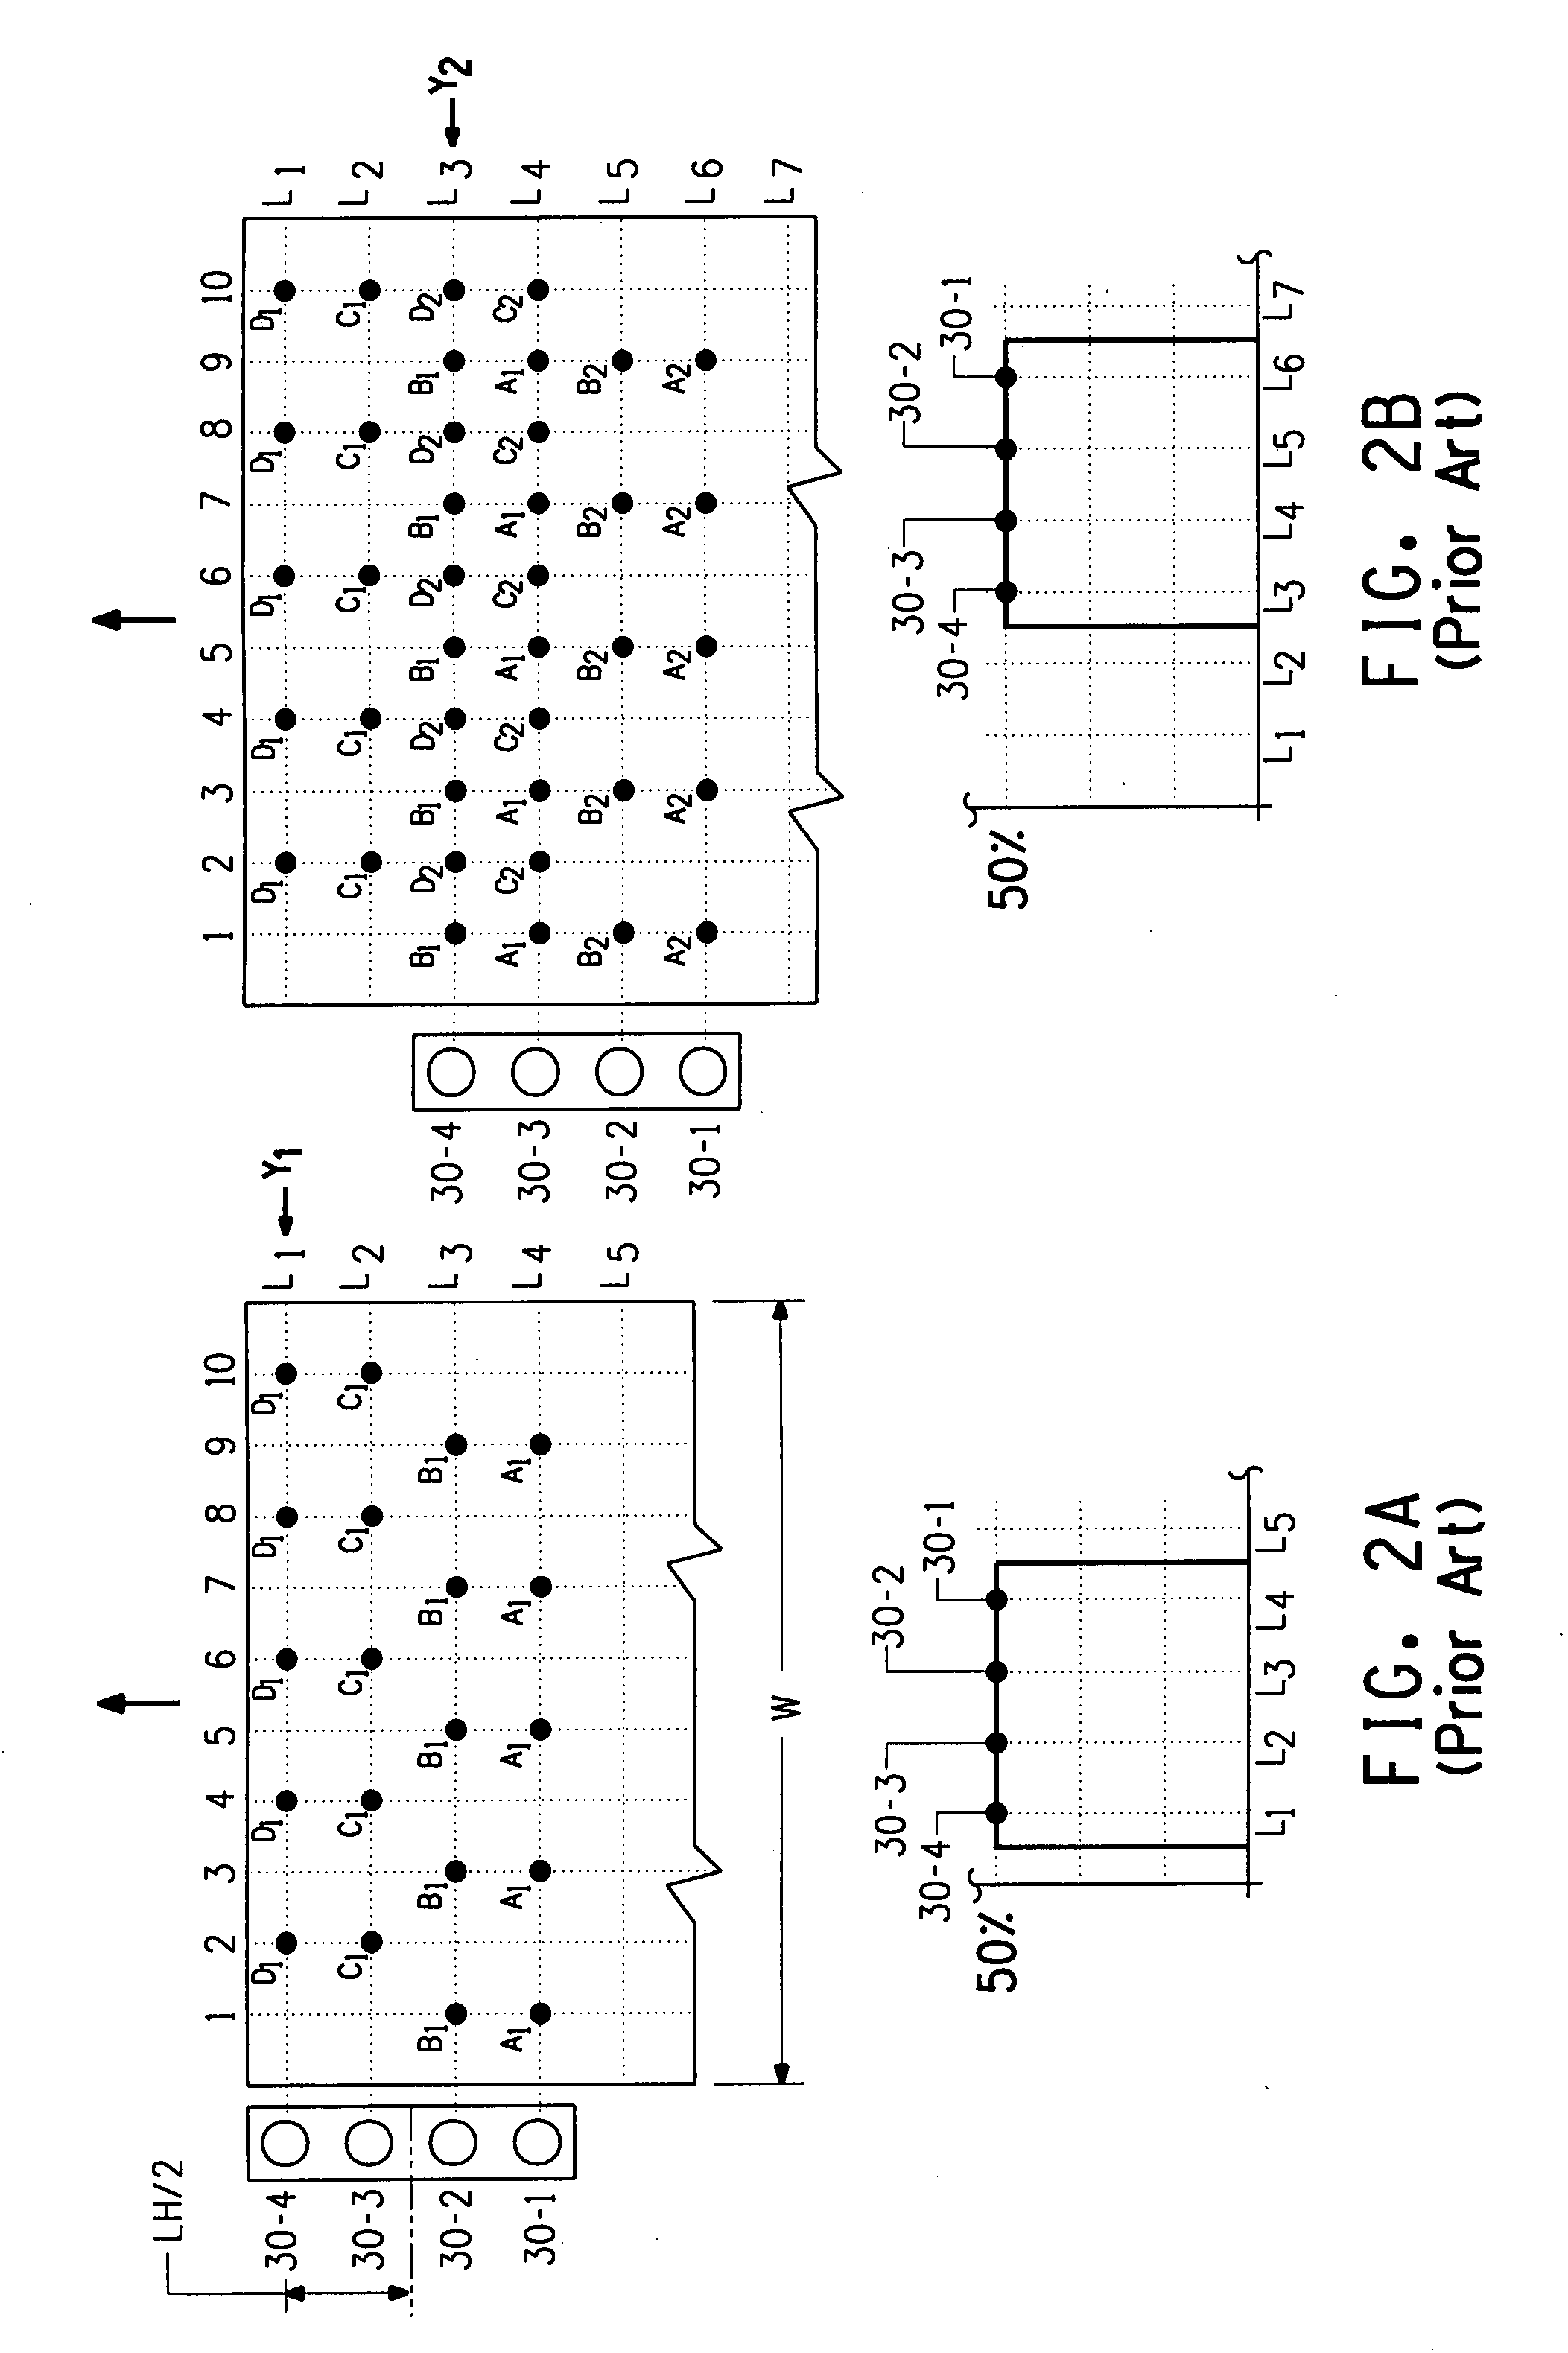 Ink jet printing apparatus having a programmed controller that minimizes banding artifacts